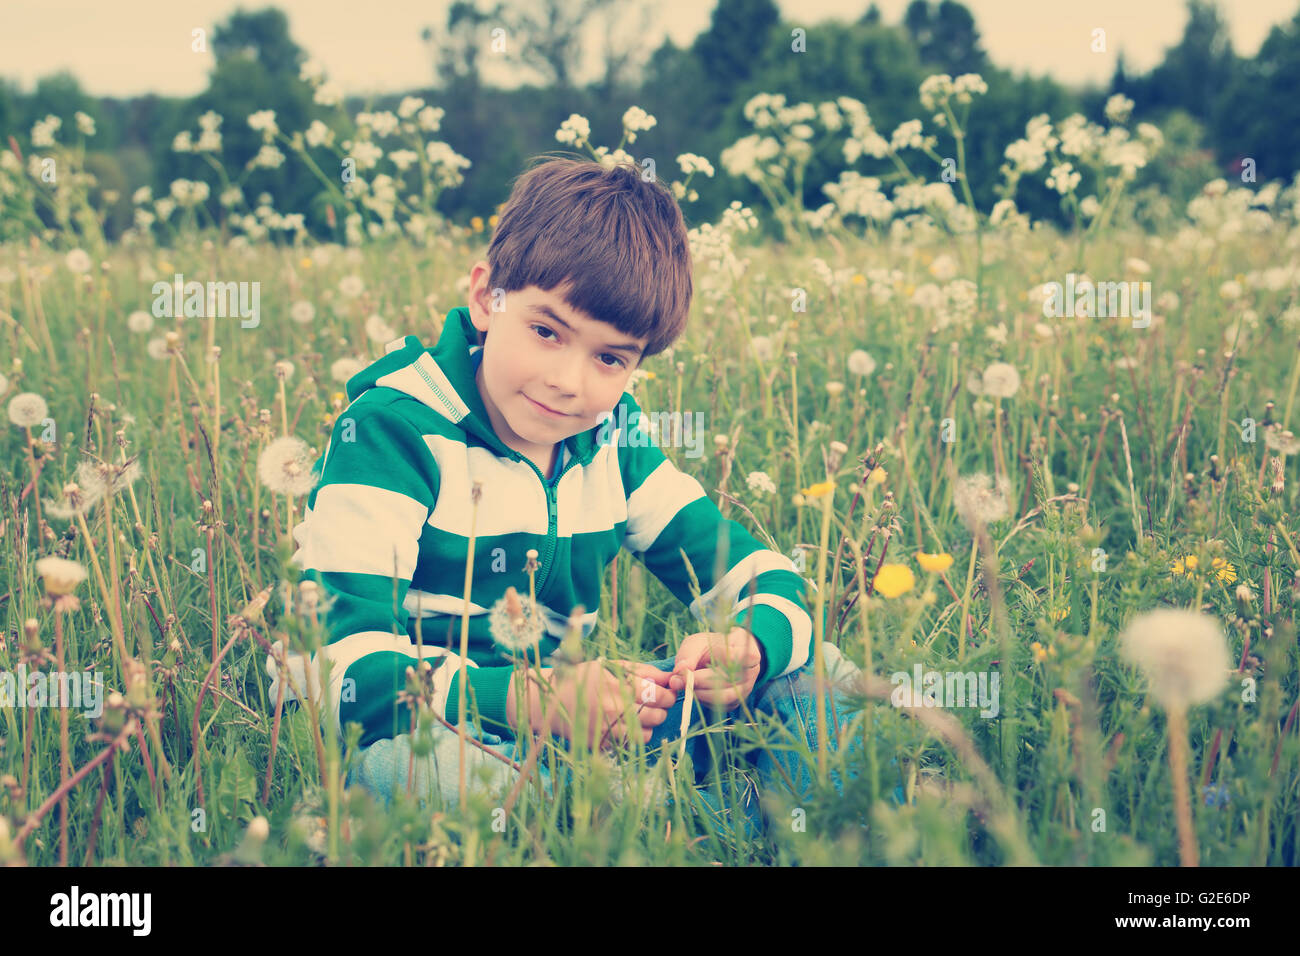 seven years old child sitting on the field with dandelions Stock Photo